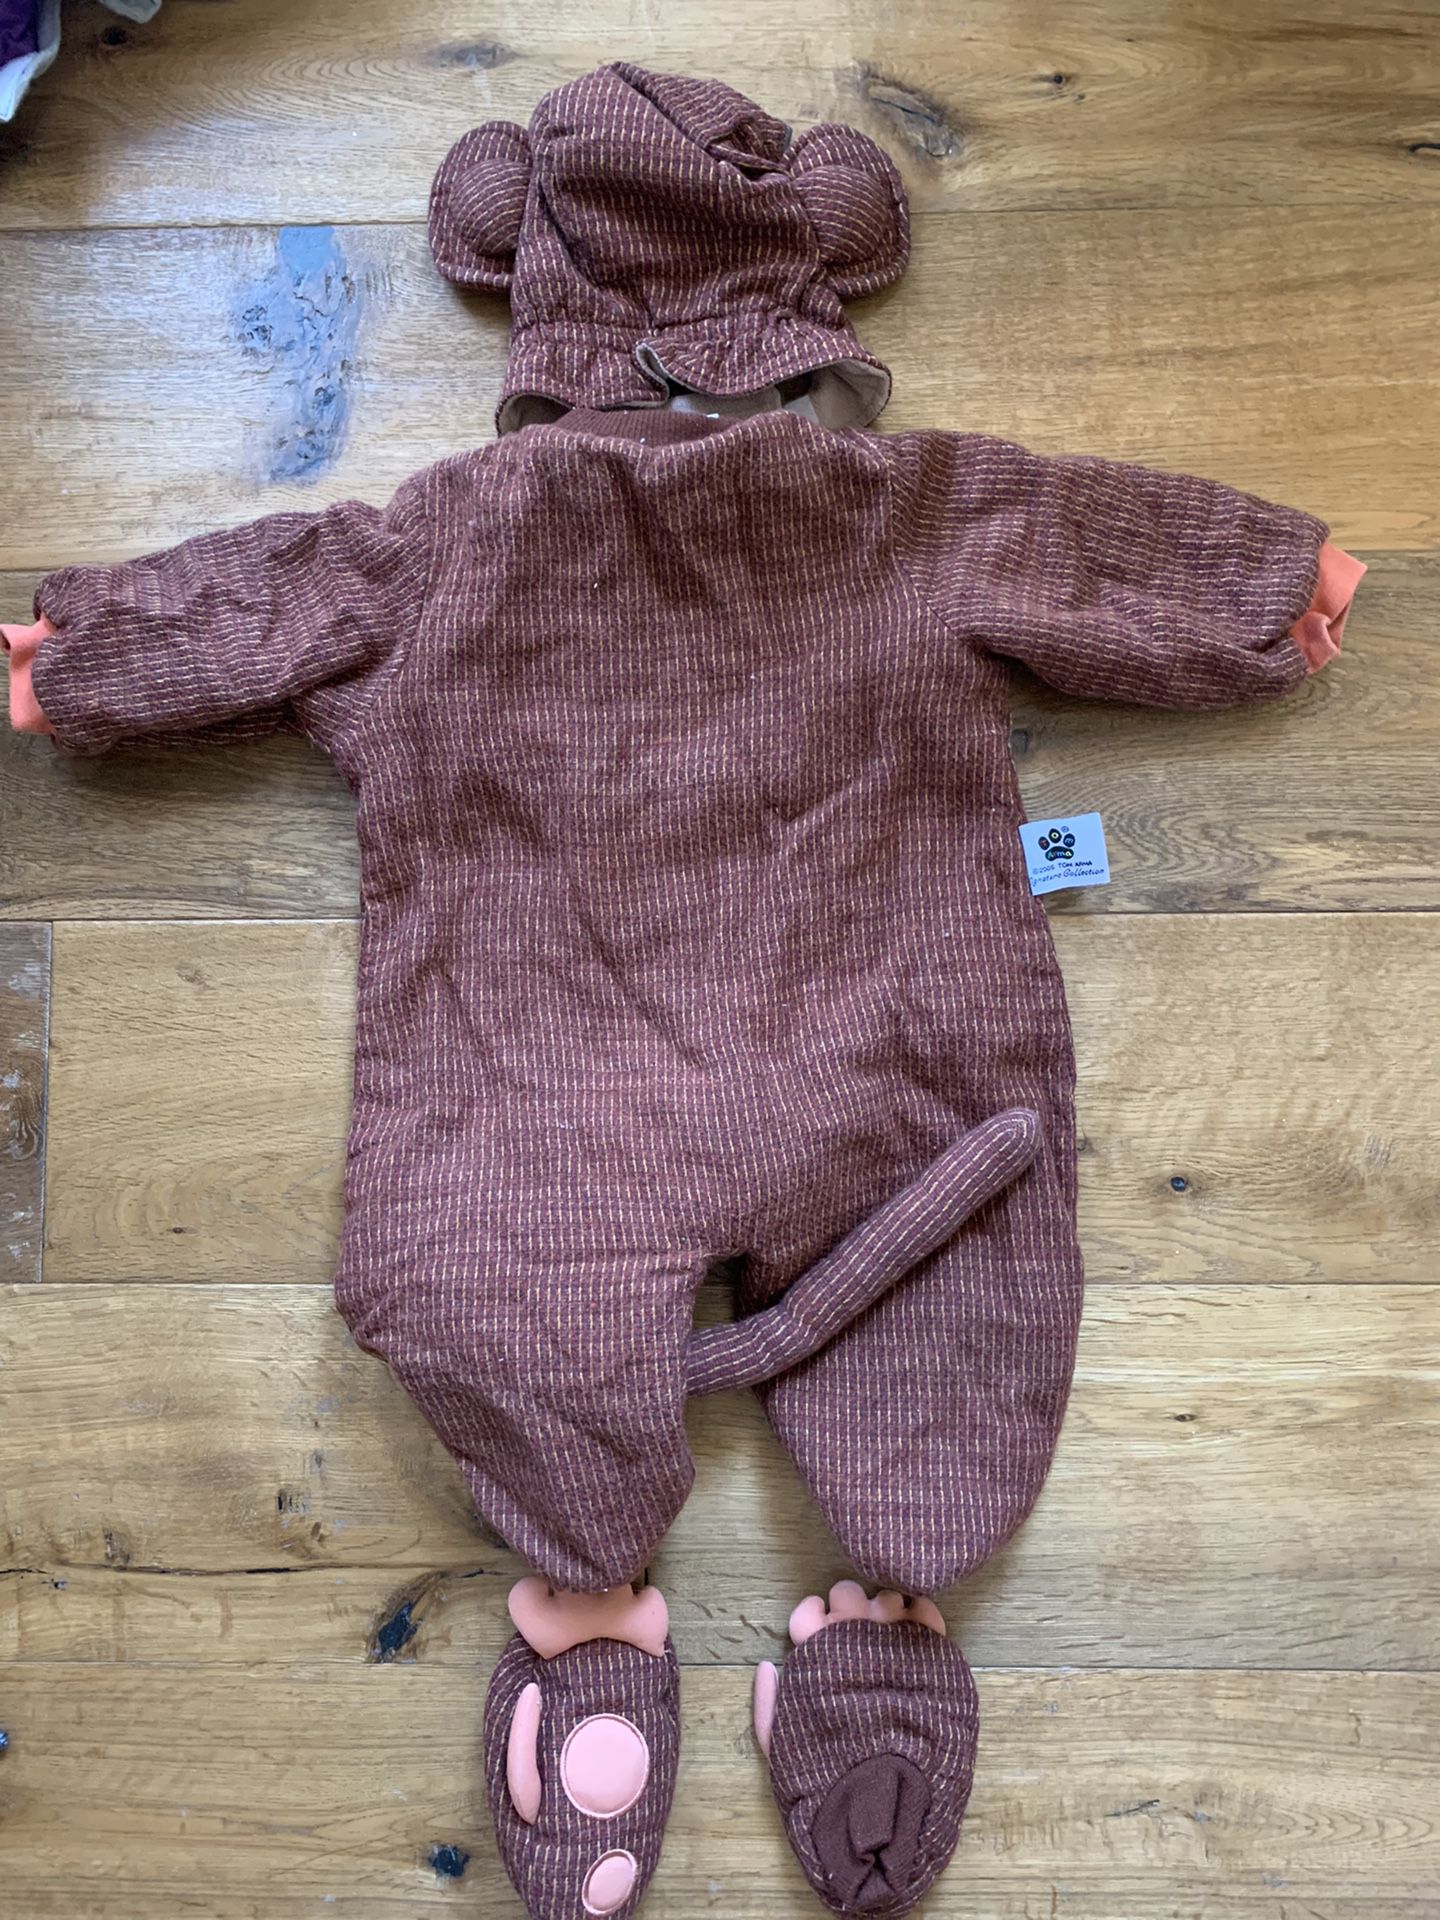 Halloween costumes: Monkey (18 months to 2T)